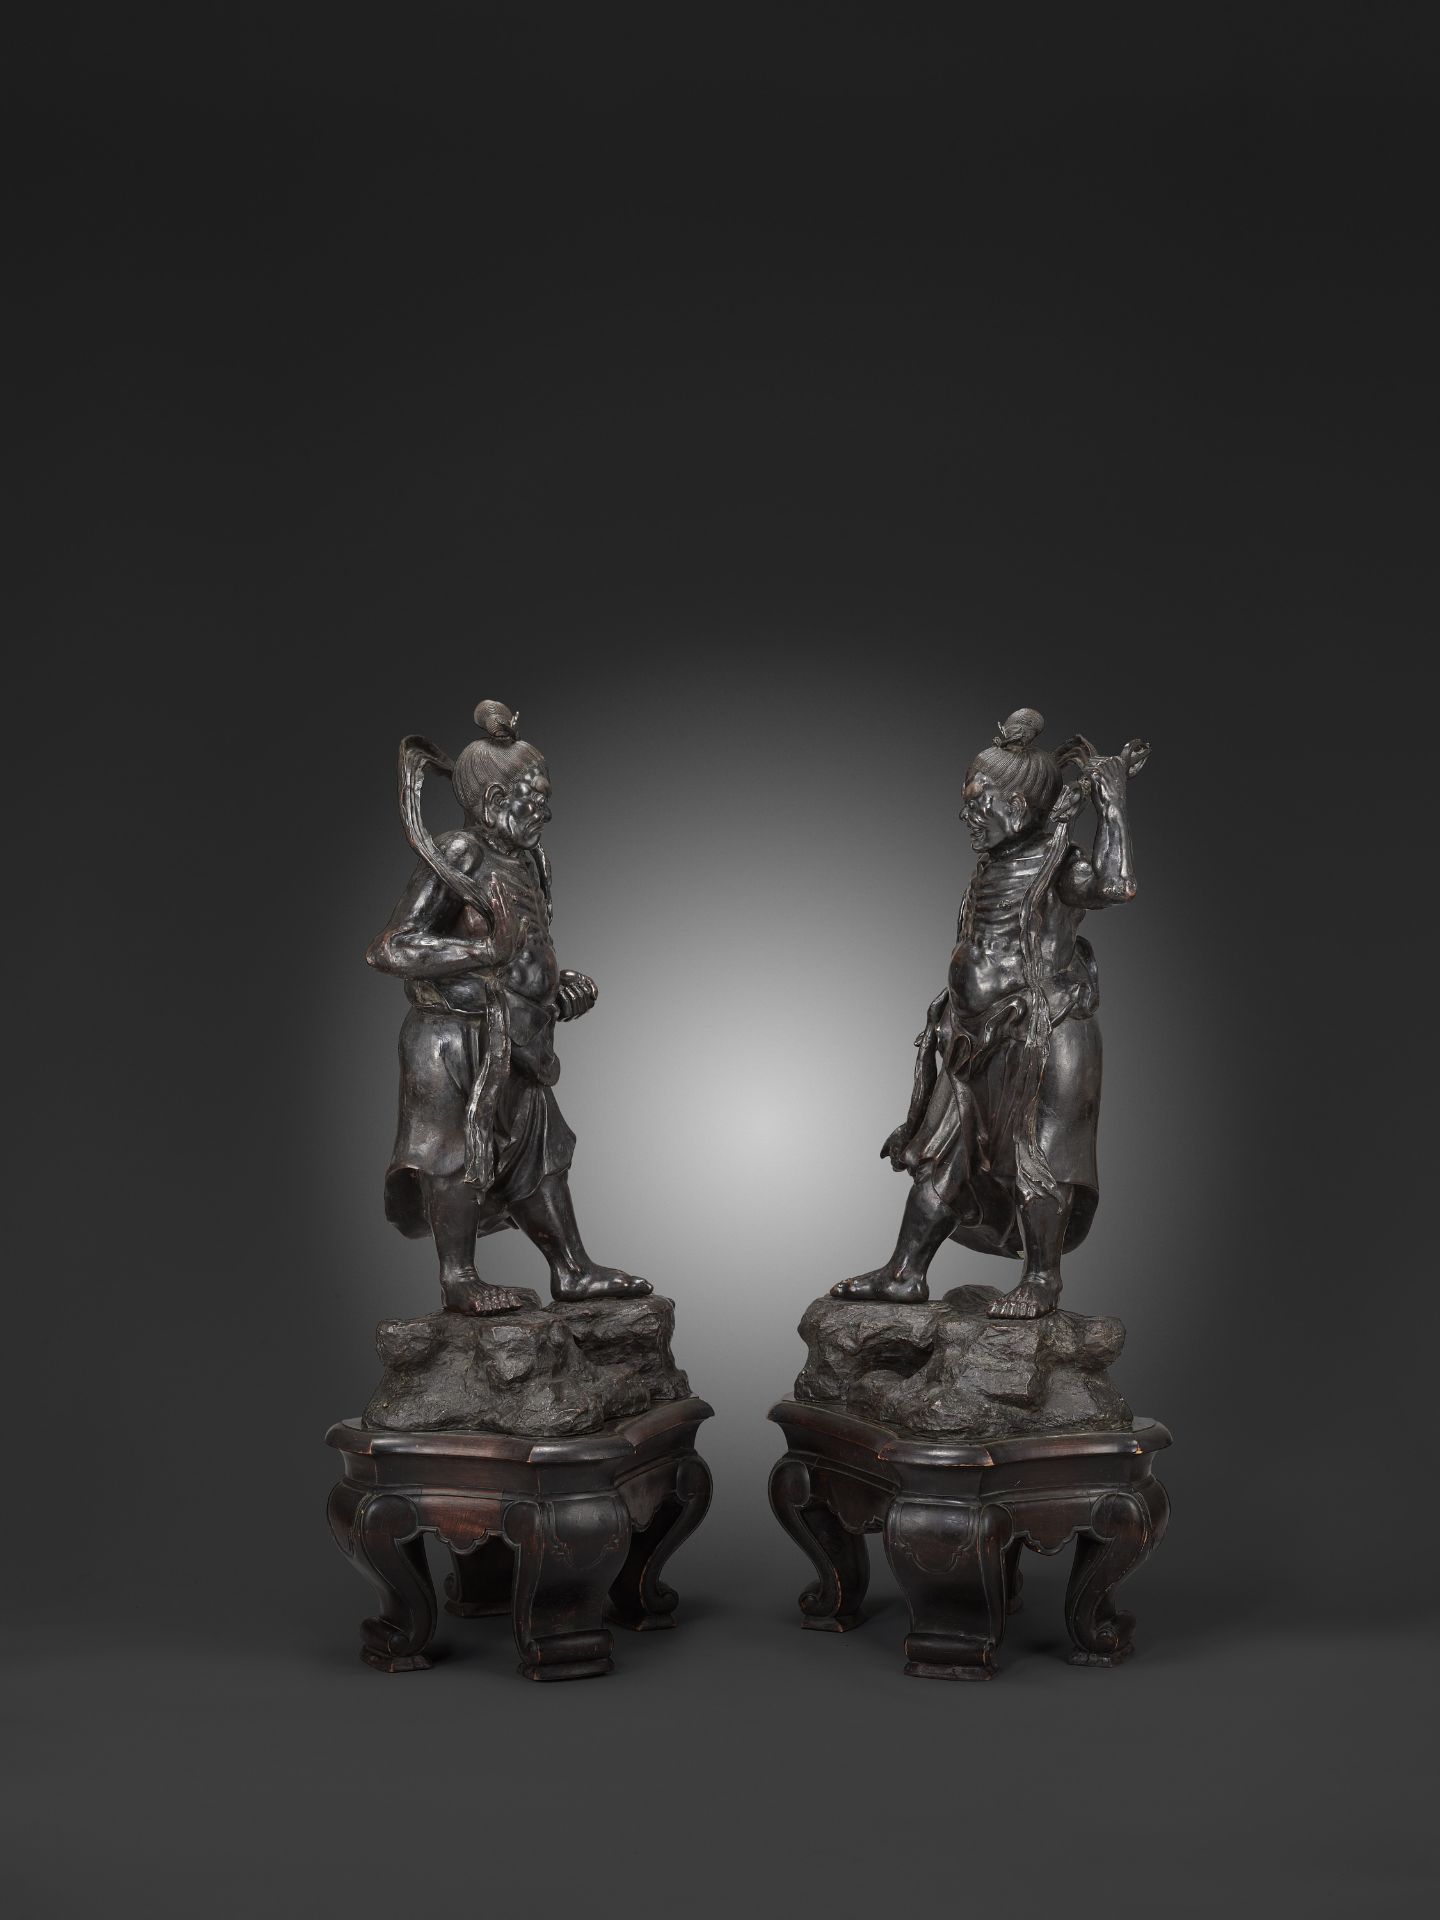 A PAIR OF MONUMENTAL BRONZE NIO GUARDIANS, DATED 1783 BY INSCRIPTION - Image 11 of 13